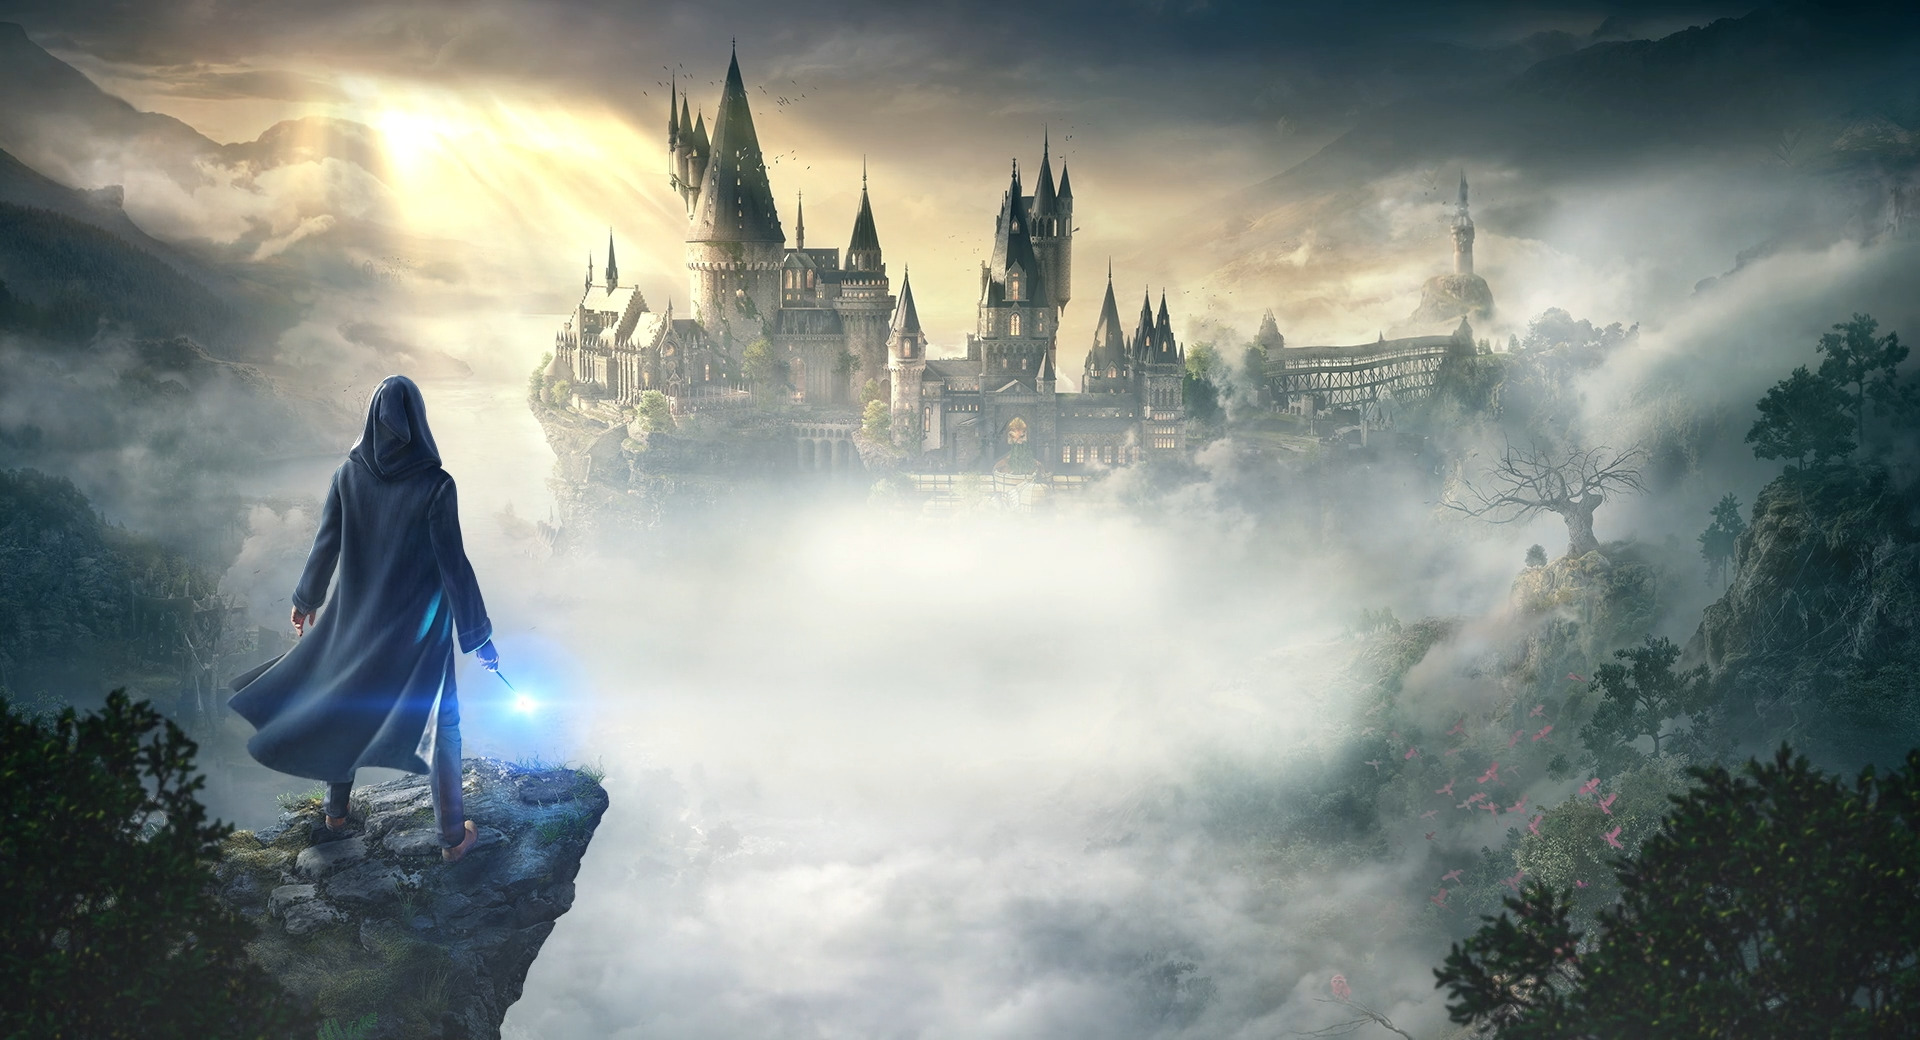 Will Hogwarts Legacy Be on Steam Deck?